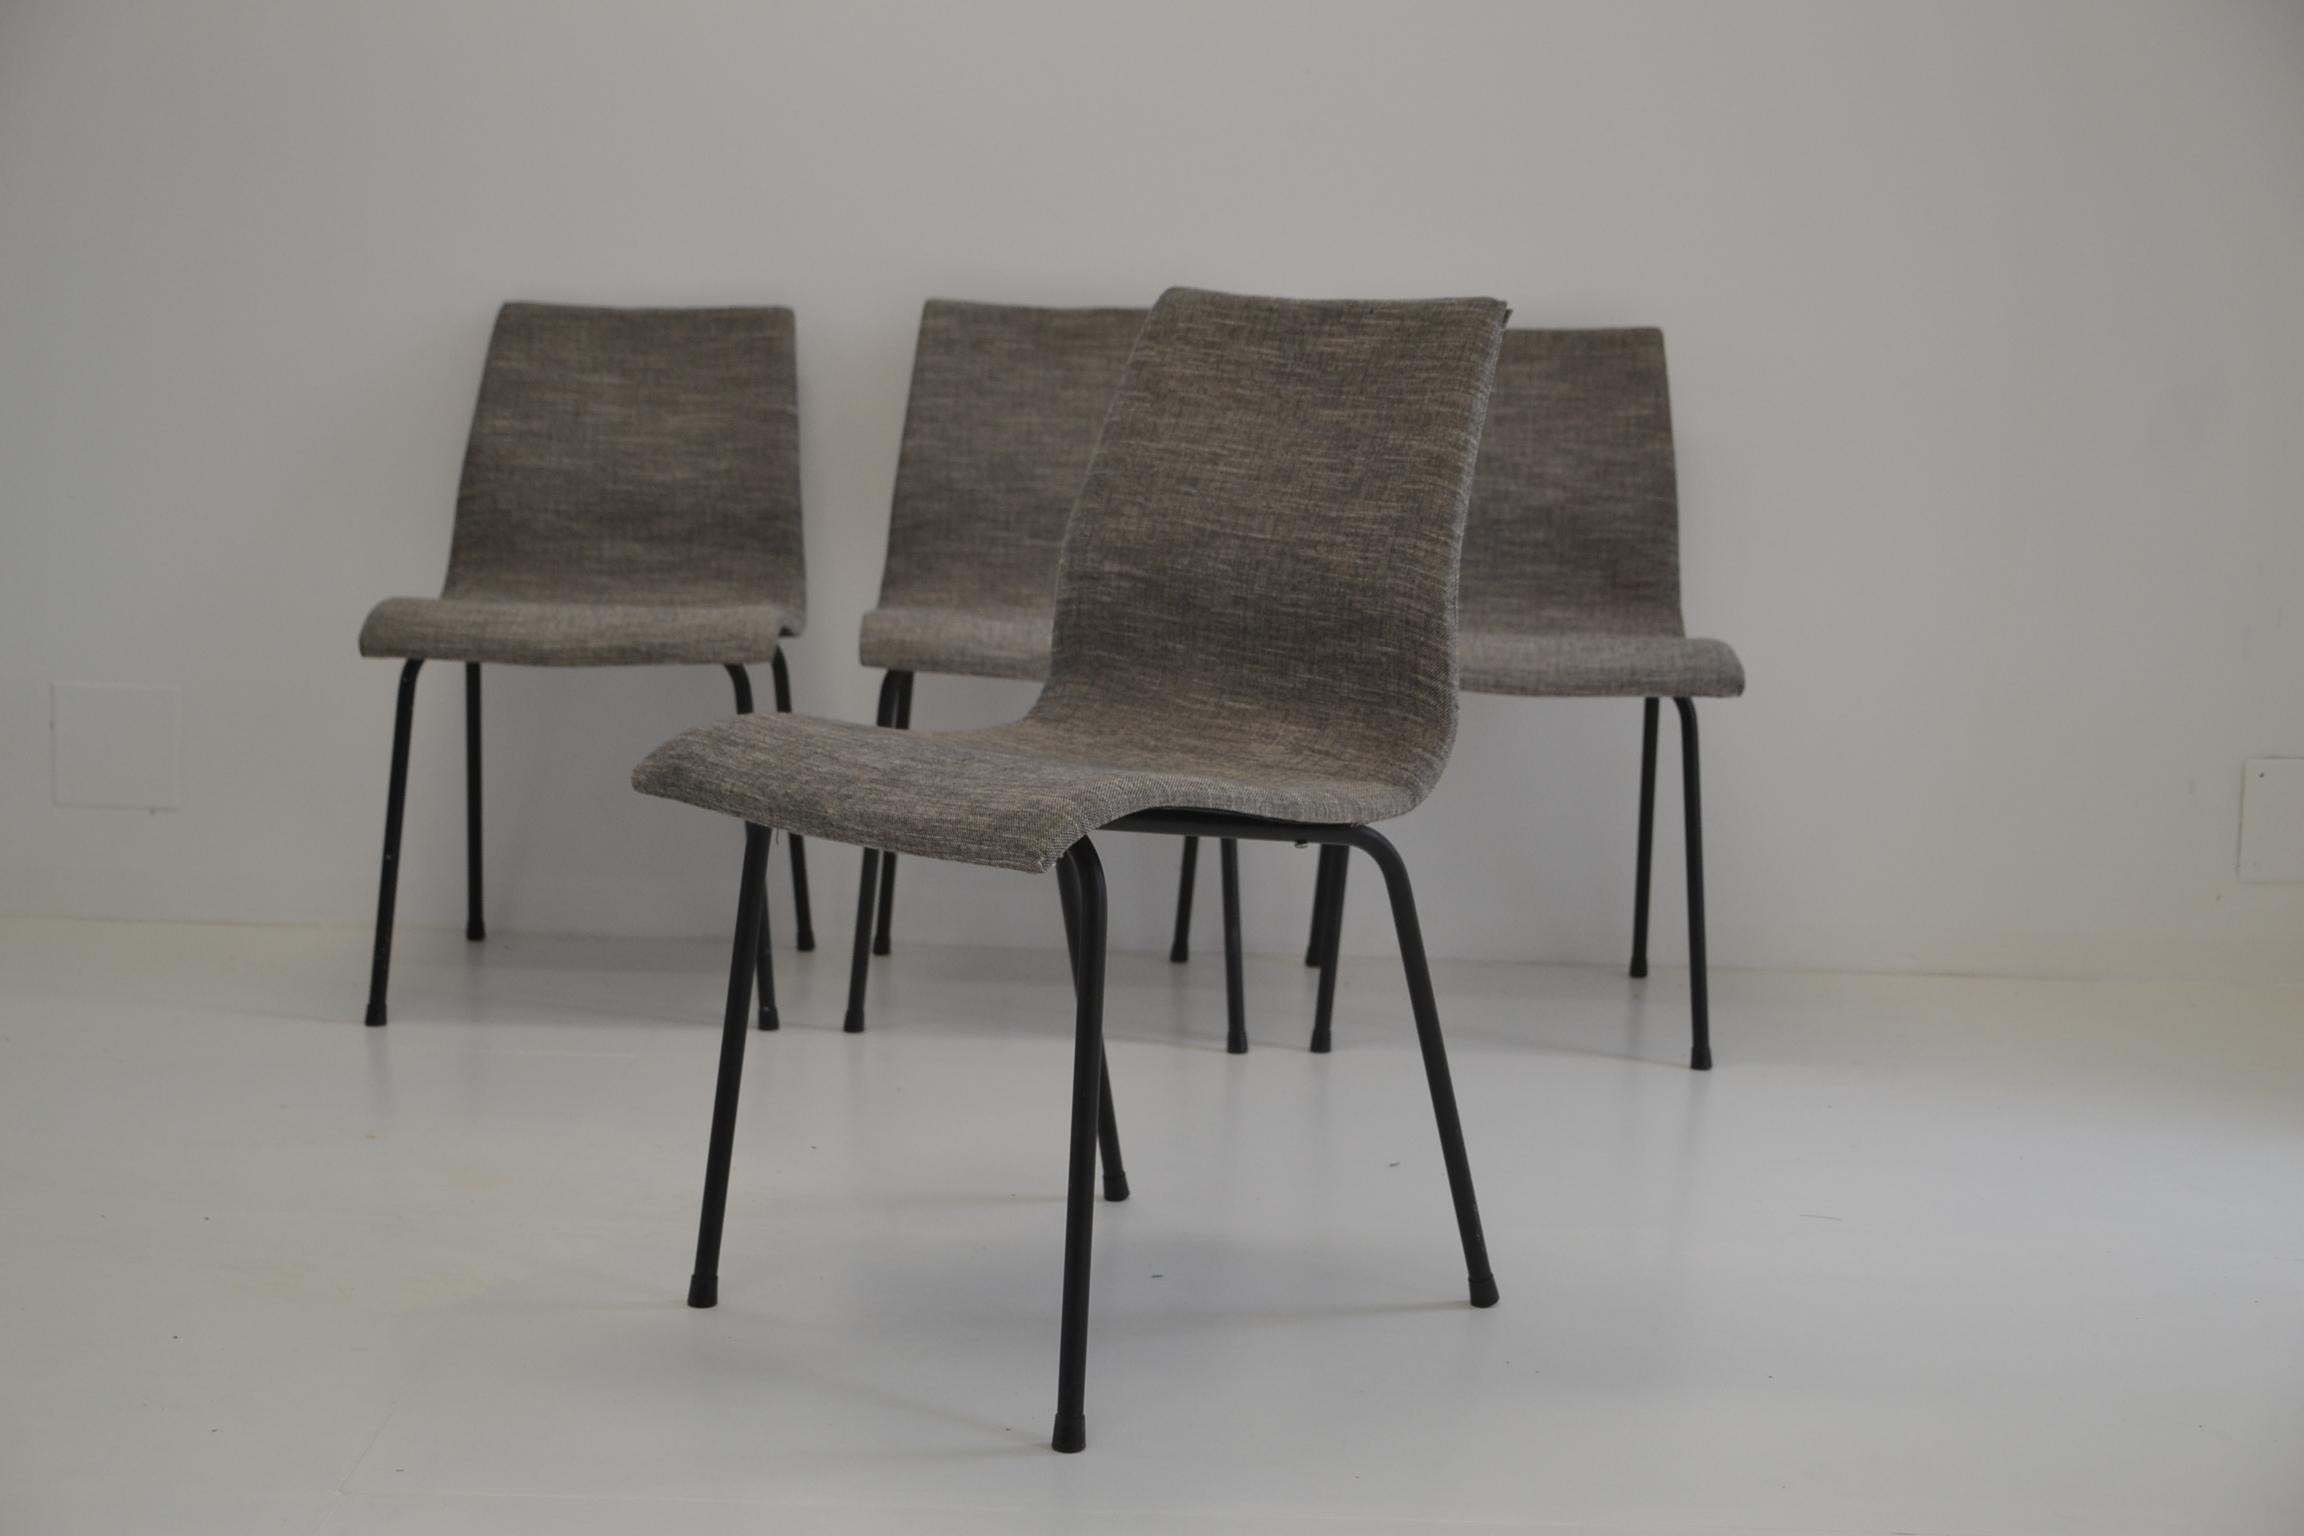 Set of chair by René-Jean Caillette
Edit GROUPE IV CHARRON
French midcentury 1950
chairs completely restored.